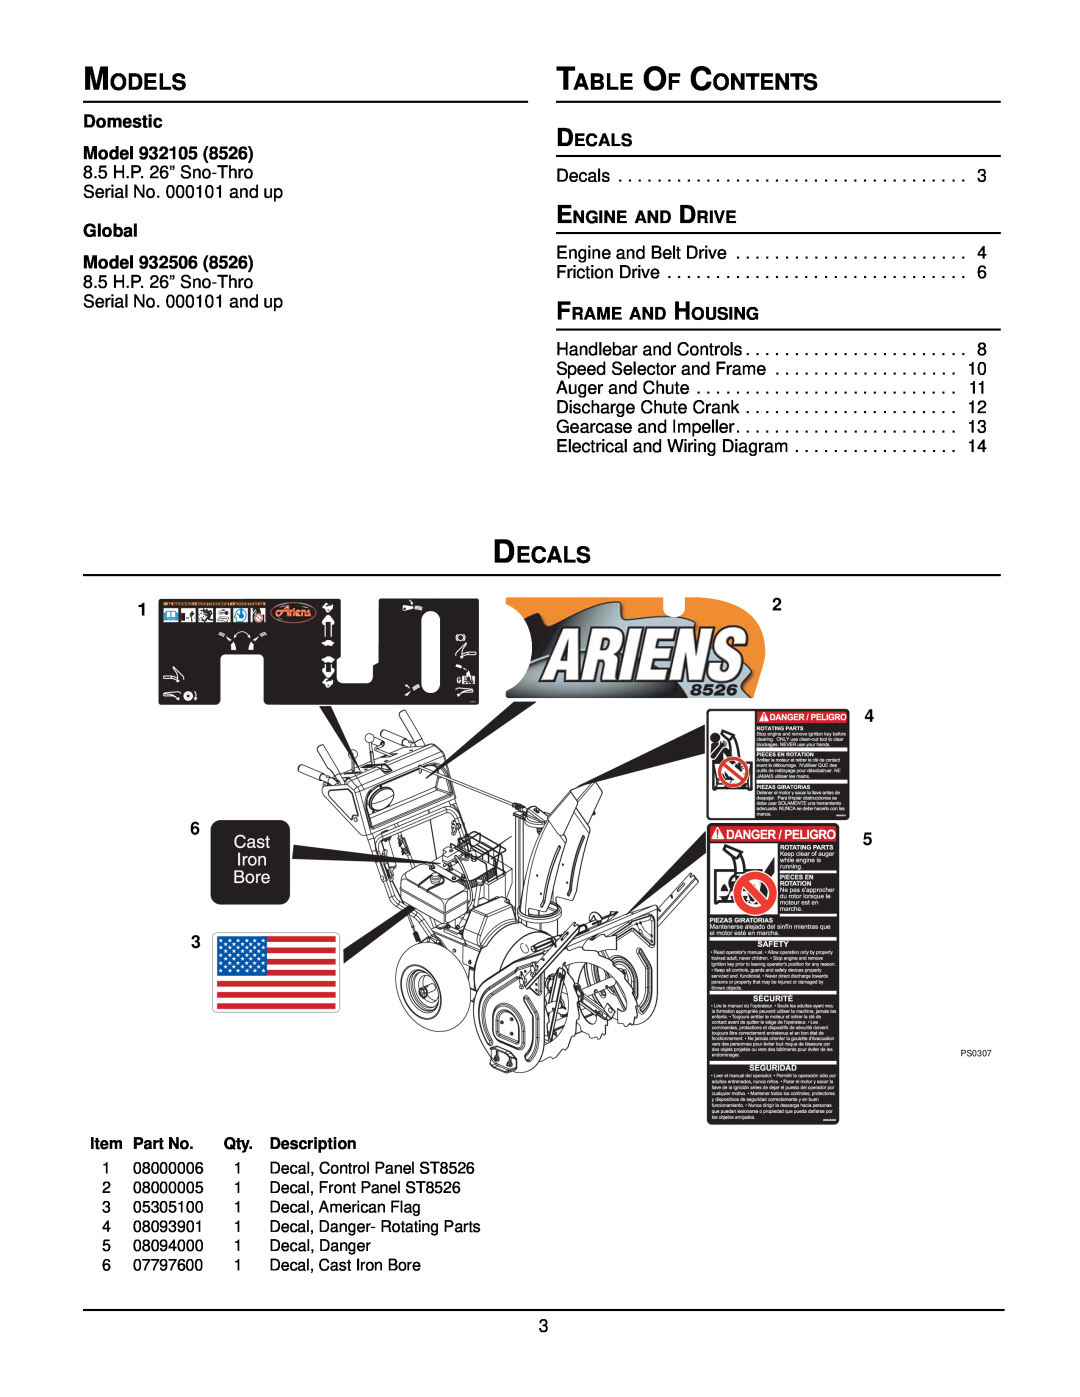 Ariens ST8526LE manual Models, Table Of Contents, Decals, Domestic, Model 932105, Engine And Drive, Global, Model 932506 